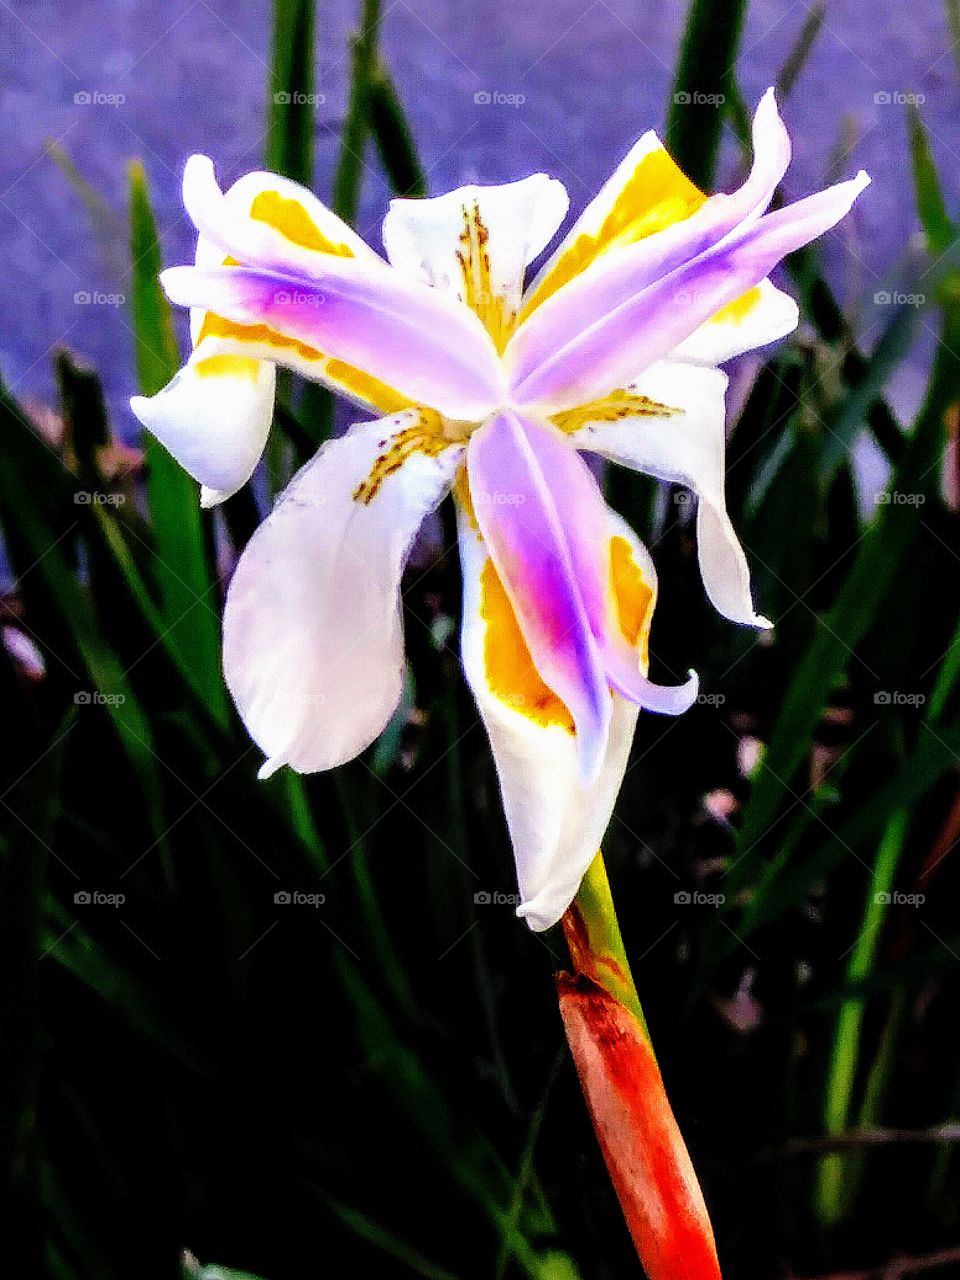 yellow purple and white flower in spring